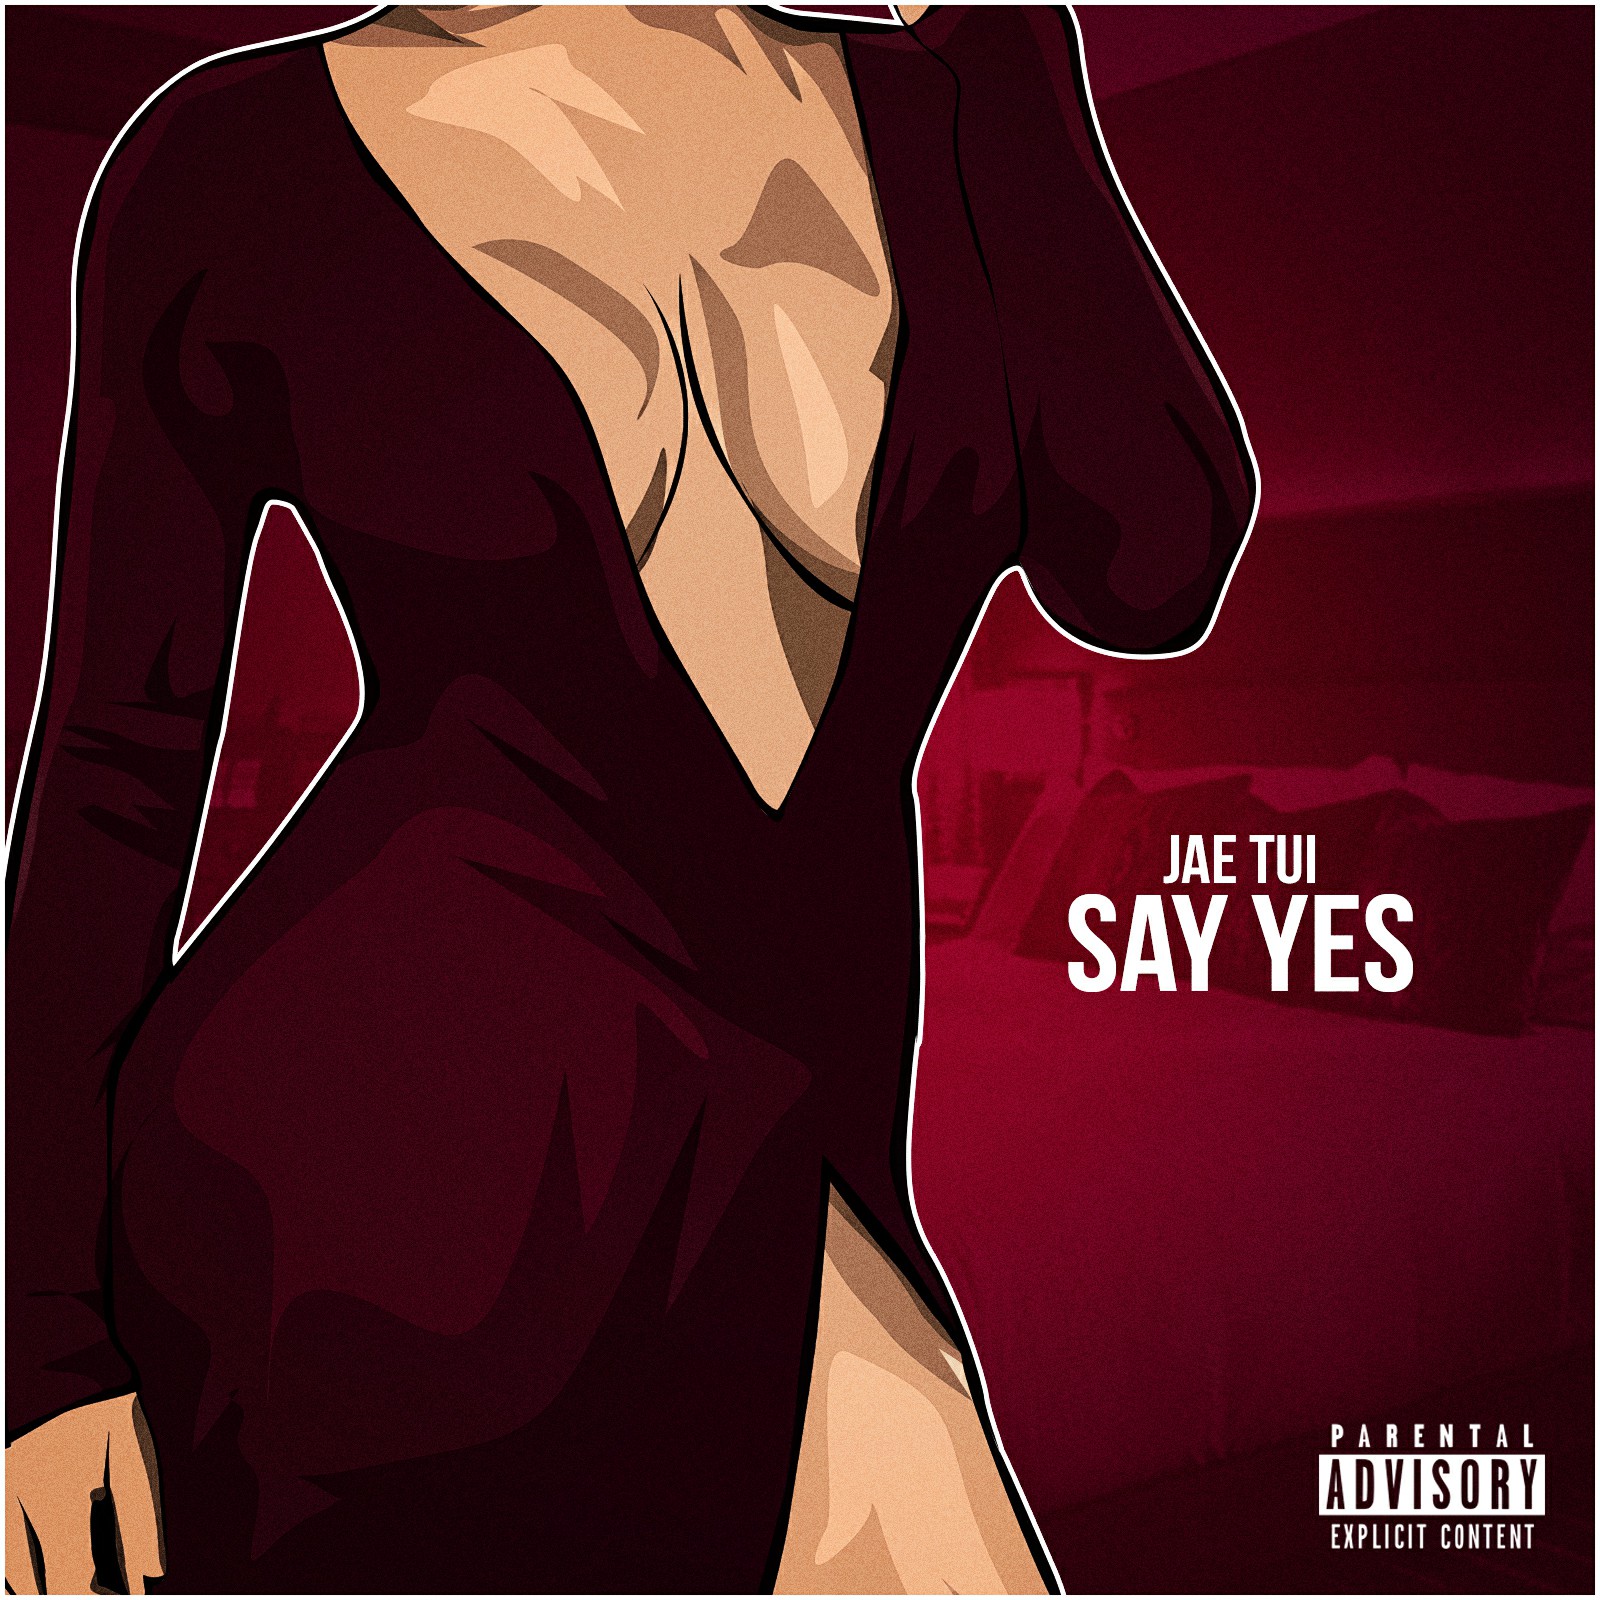 JAETUI – “Say Yes” (Snippet)